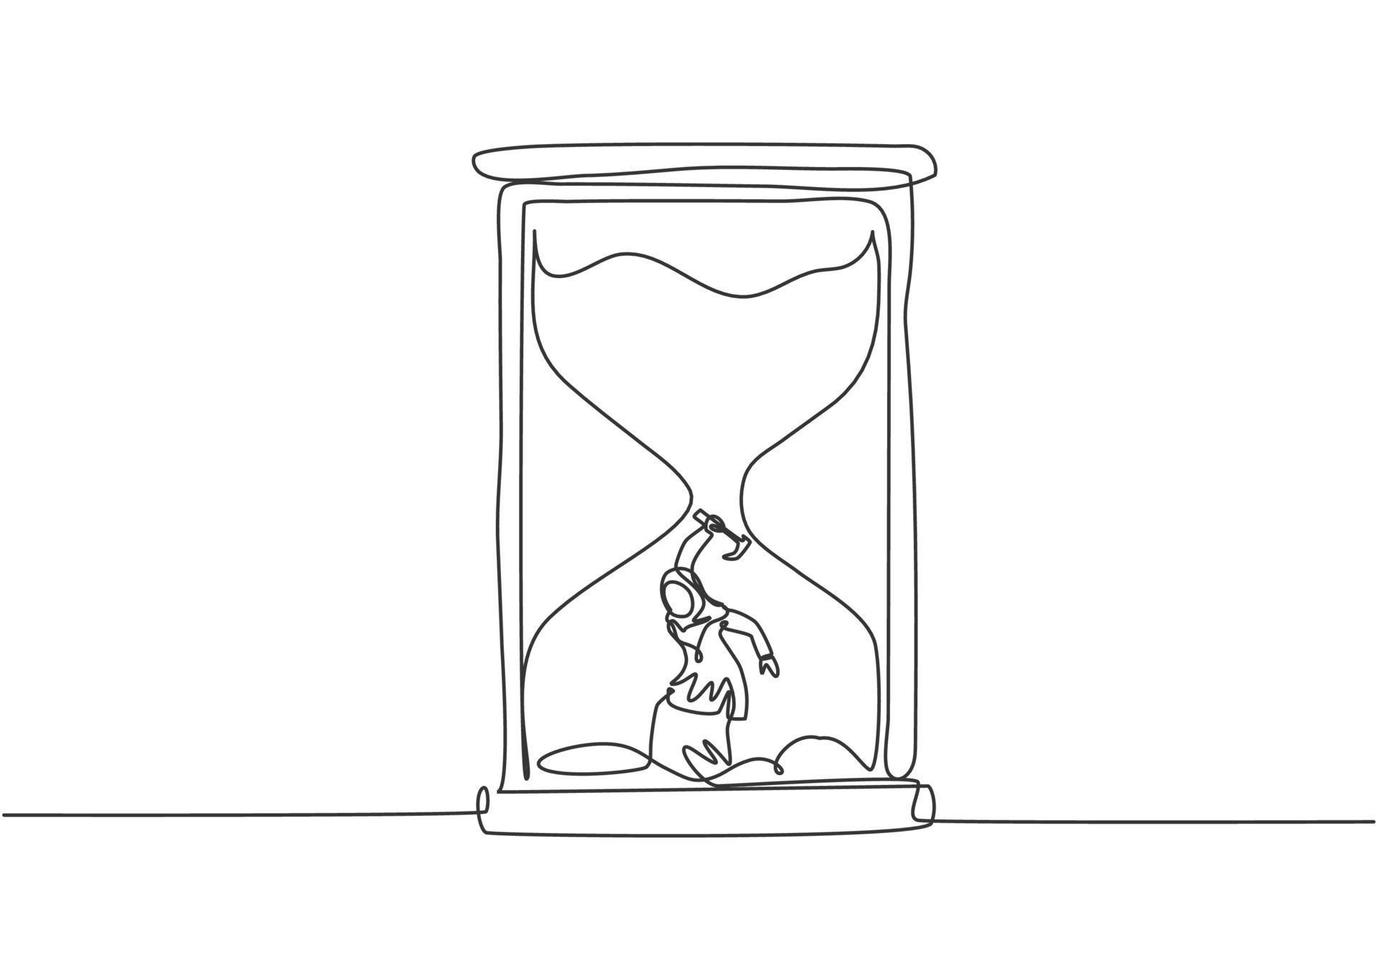 Single continuous line drawing young Arab business woman digging treasure inside hourglass. Getting a new business idea minimalist concept. Dynamic one line draw graphic design vector illustration.